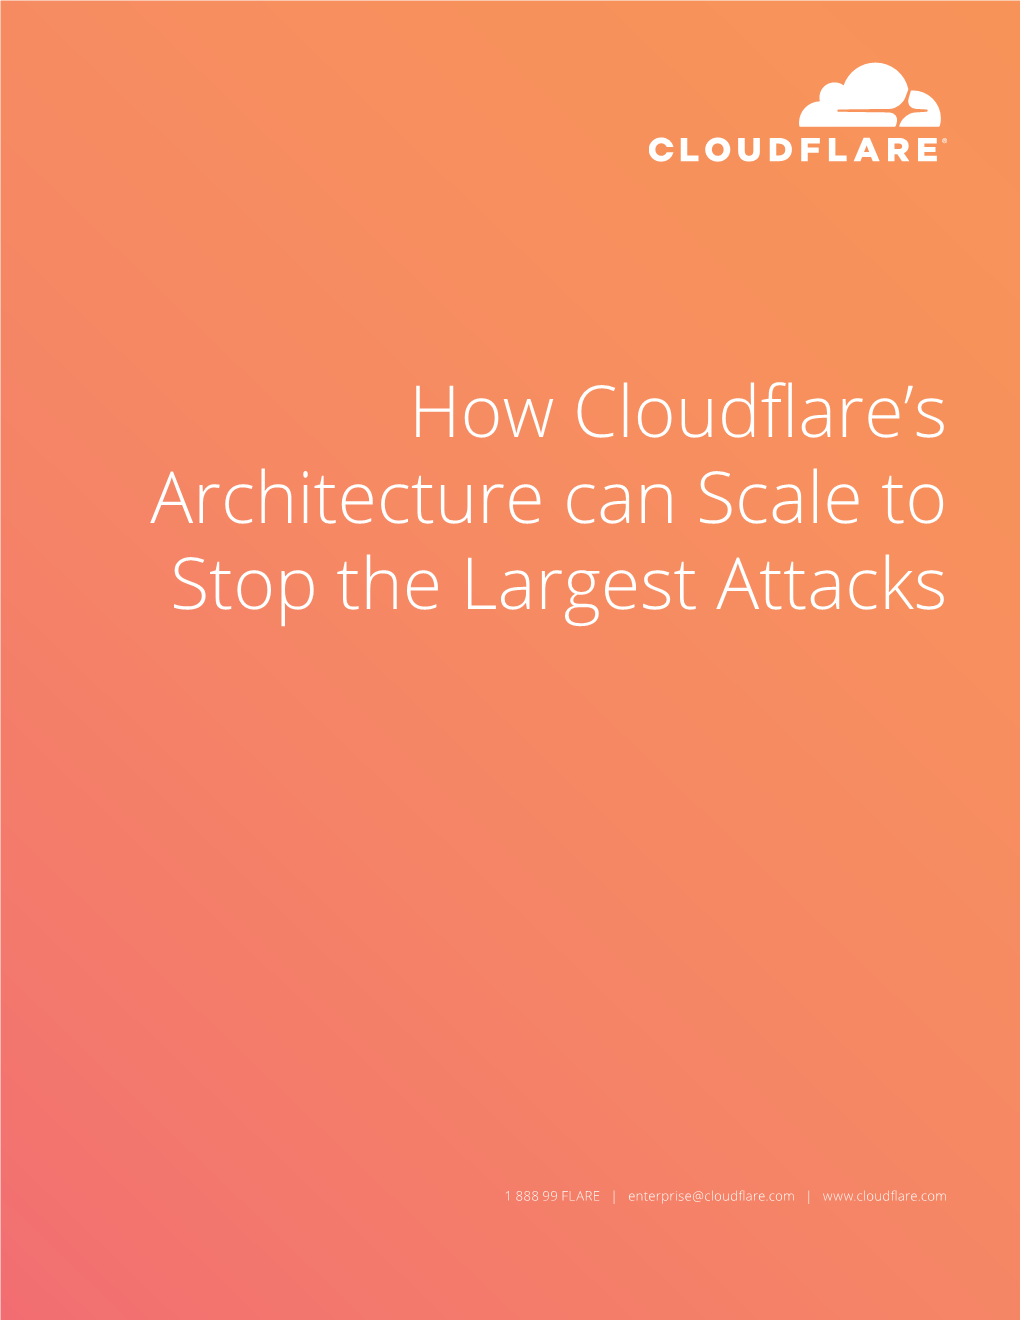 How Cloudflare's Architecture Can Scale to Stop the Largest Attacks